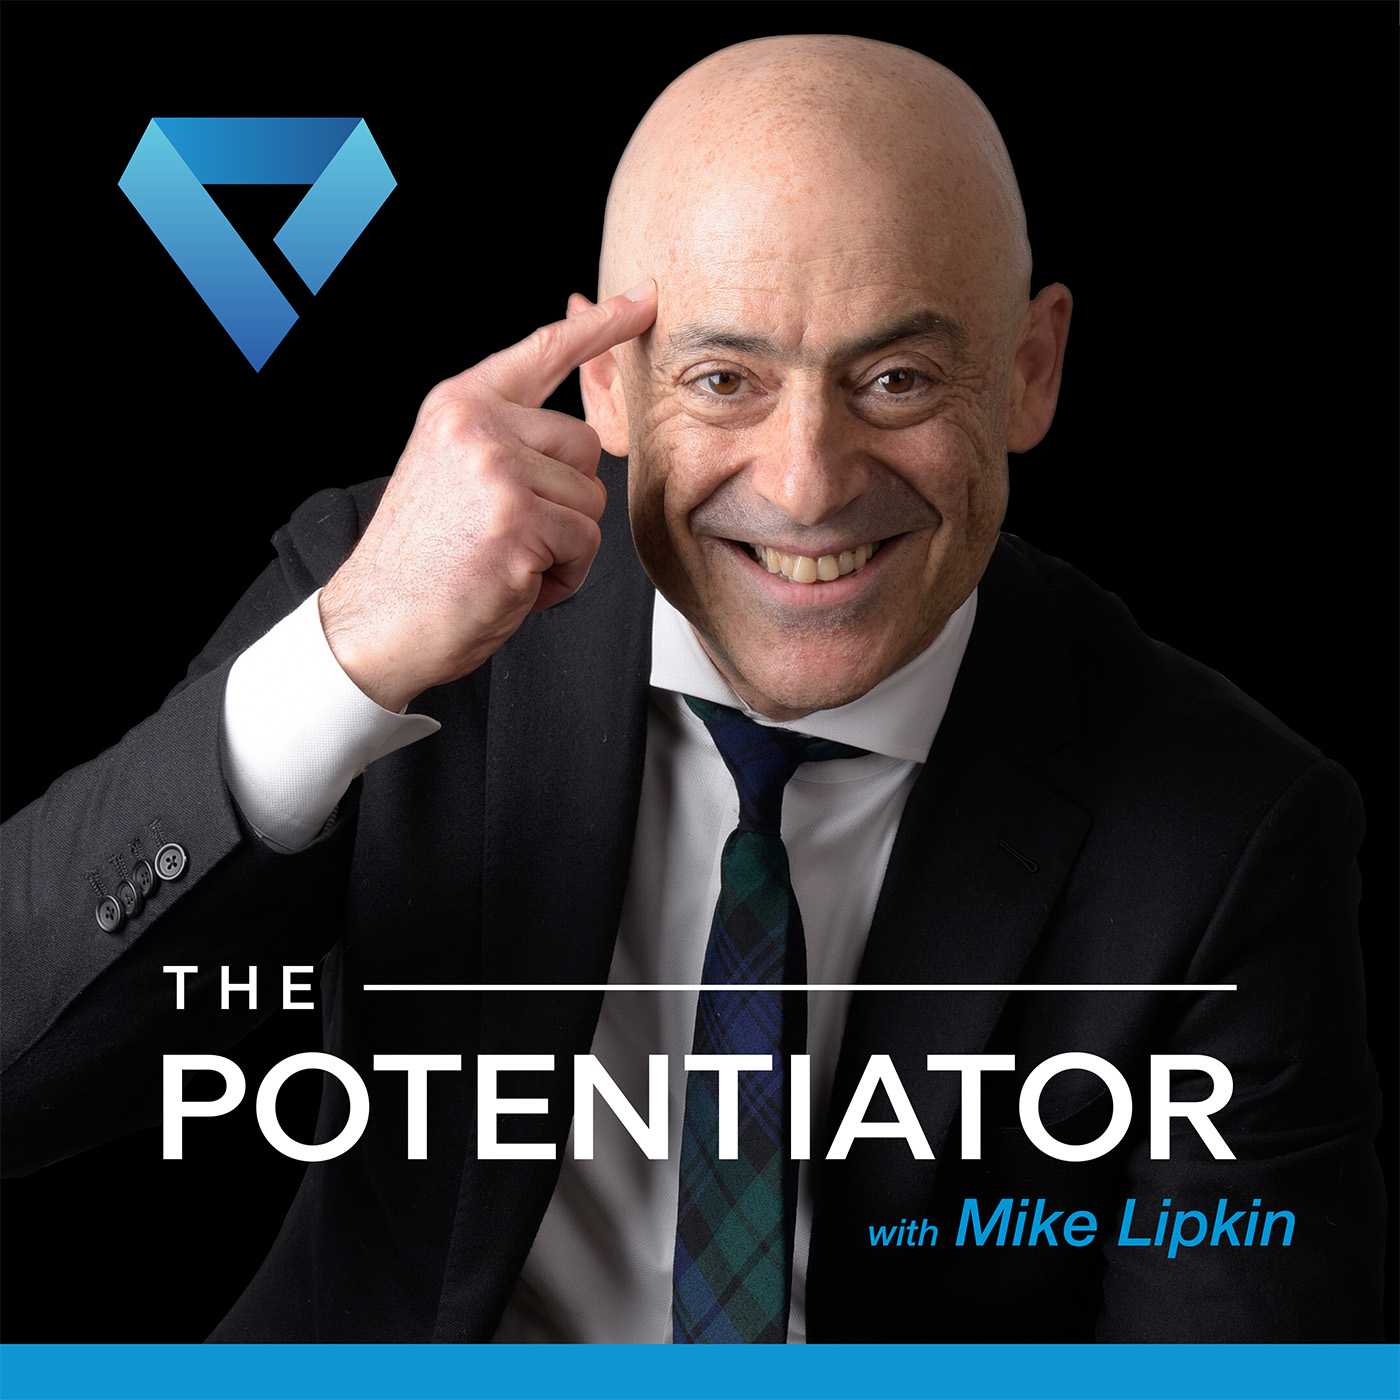 The Potentiator with Mike Lipkin